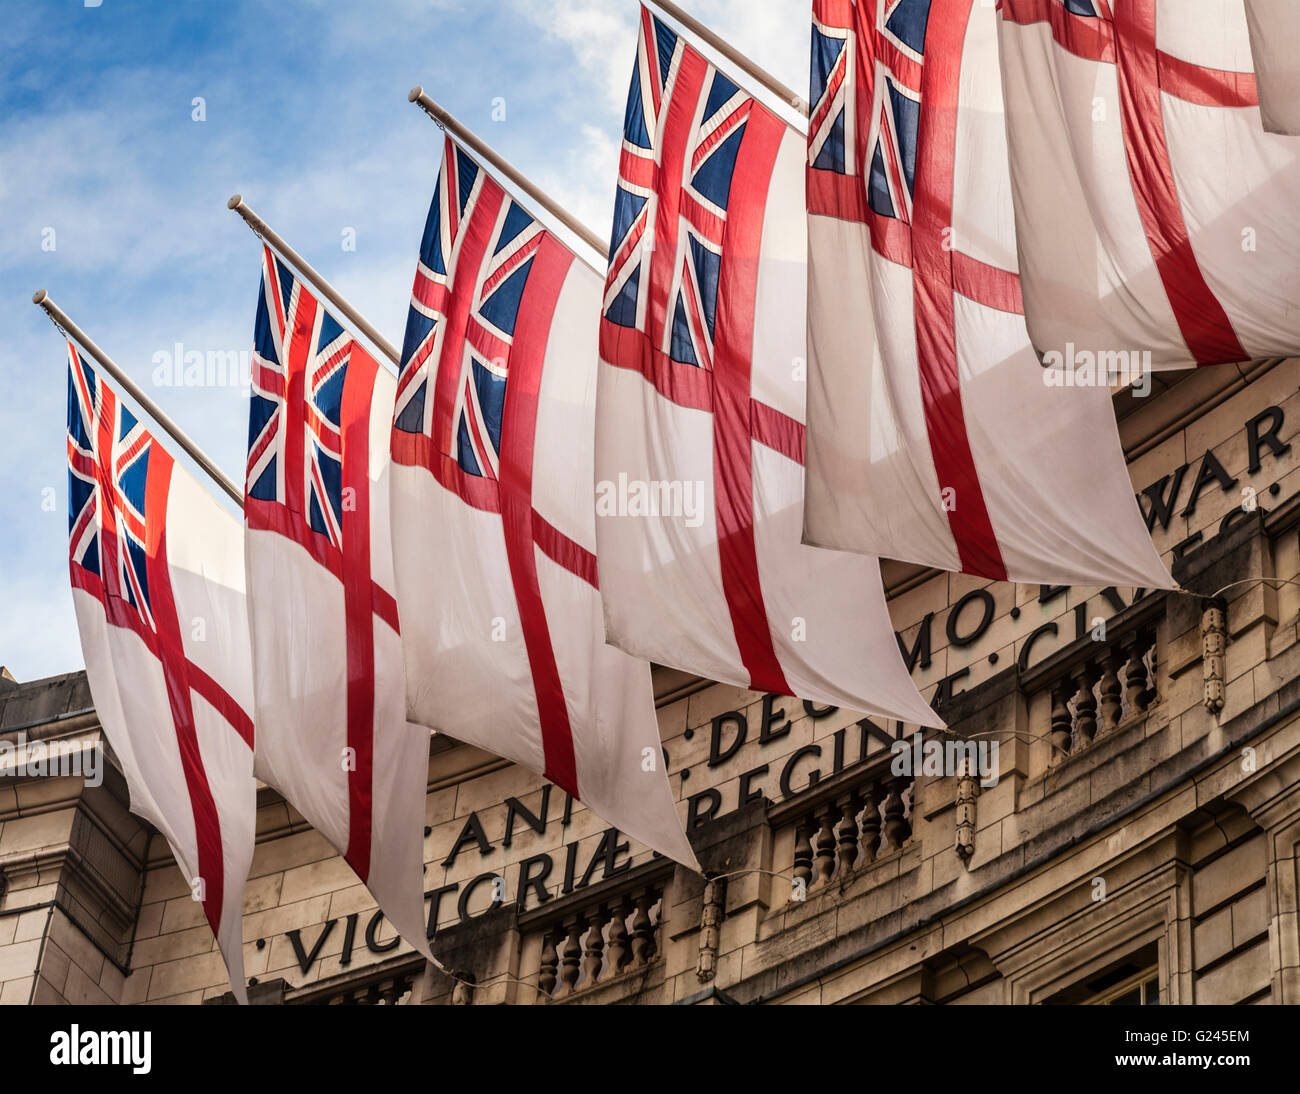 White Ensign flags on display at Admiralty Arch, London, England. Stock Photo